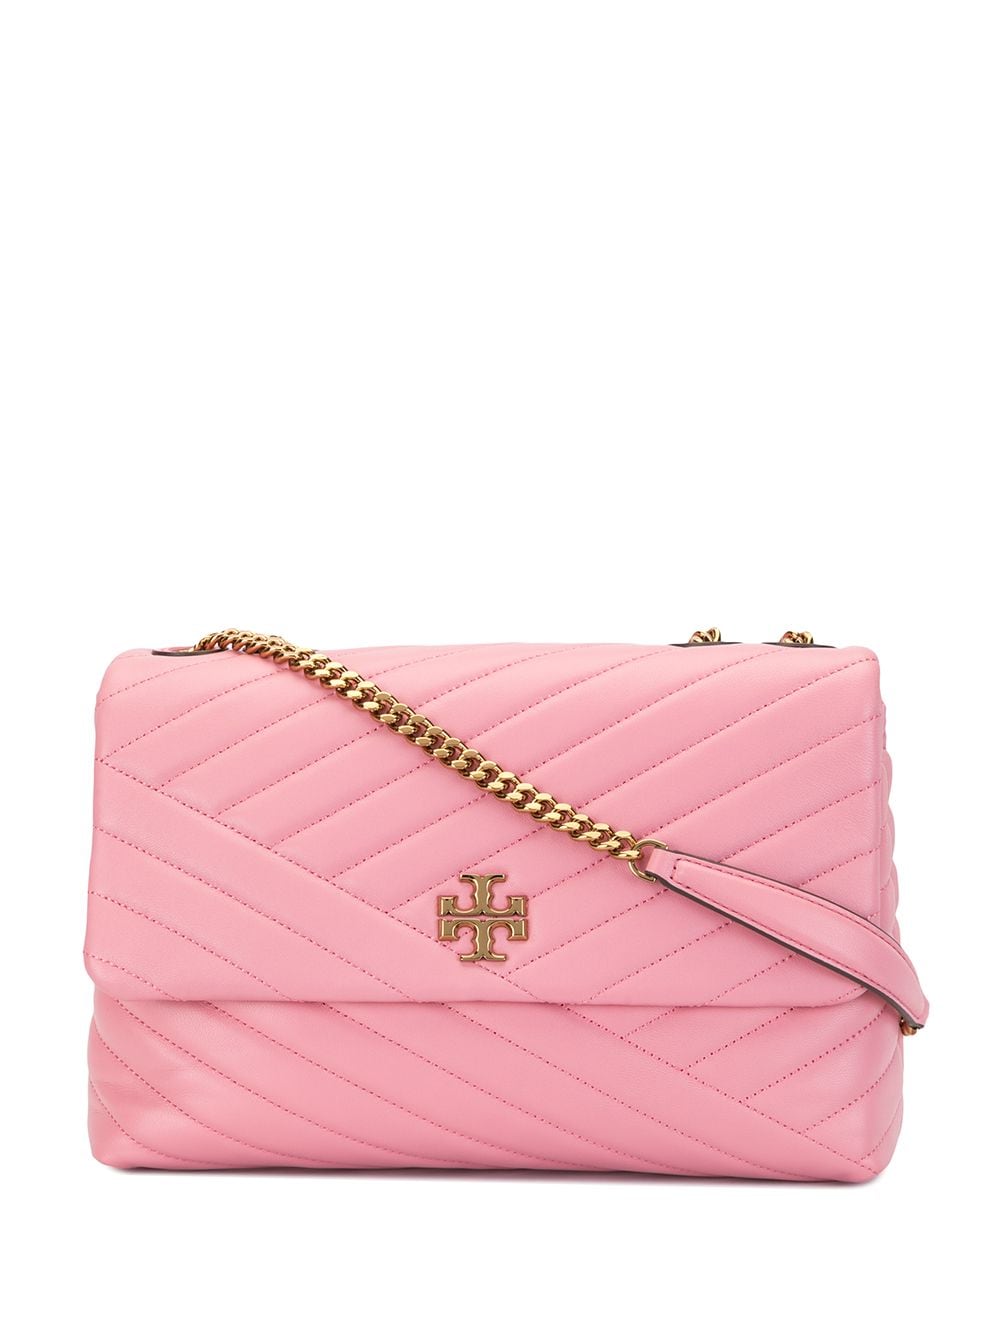 Image 1 of Tory Burch Kira chevron-quilted shoulder bag